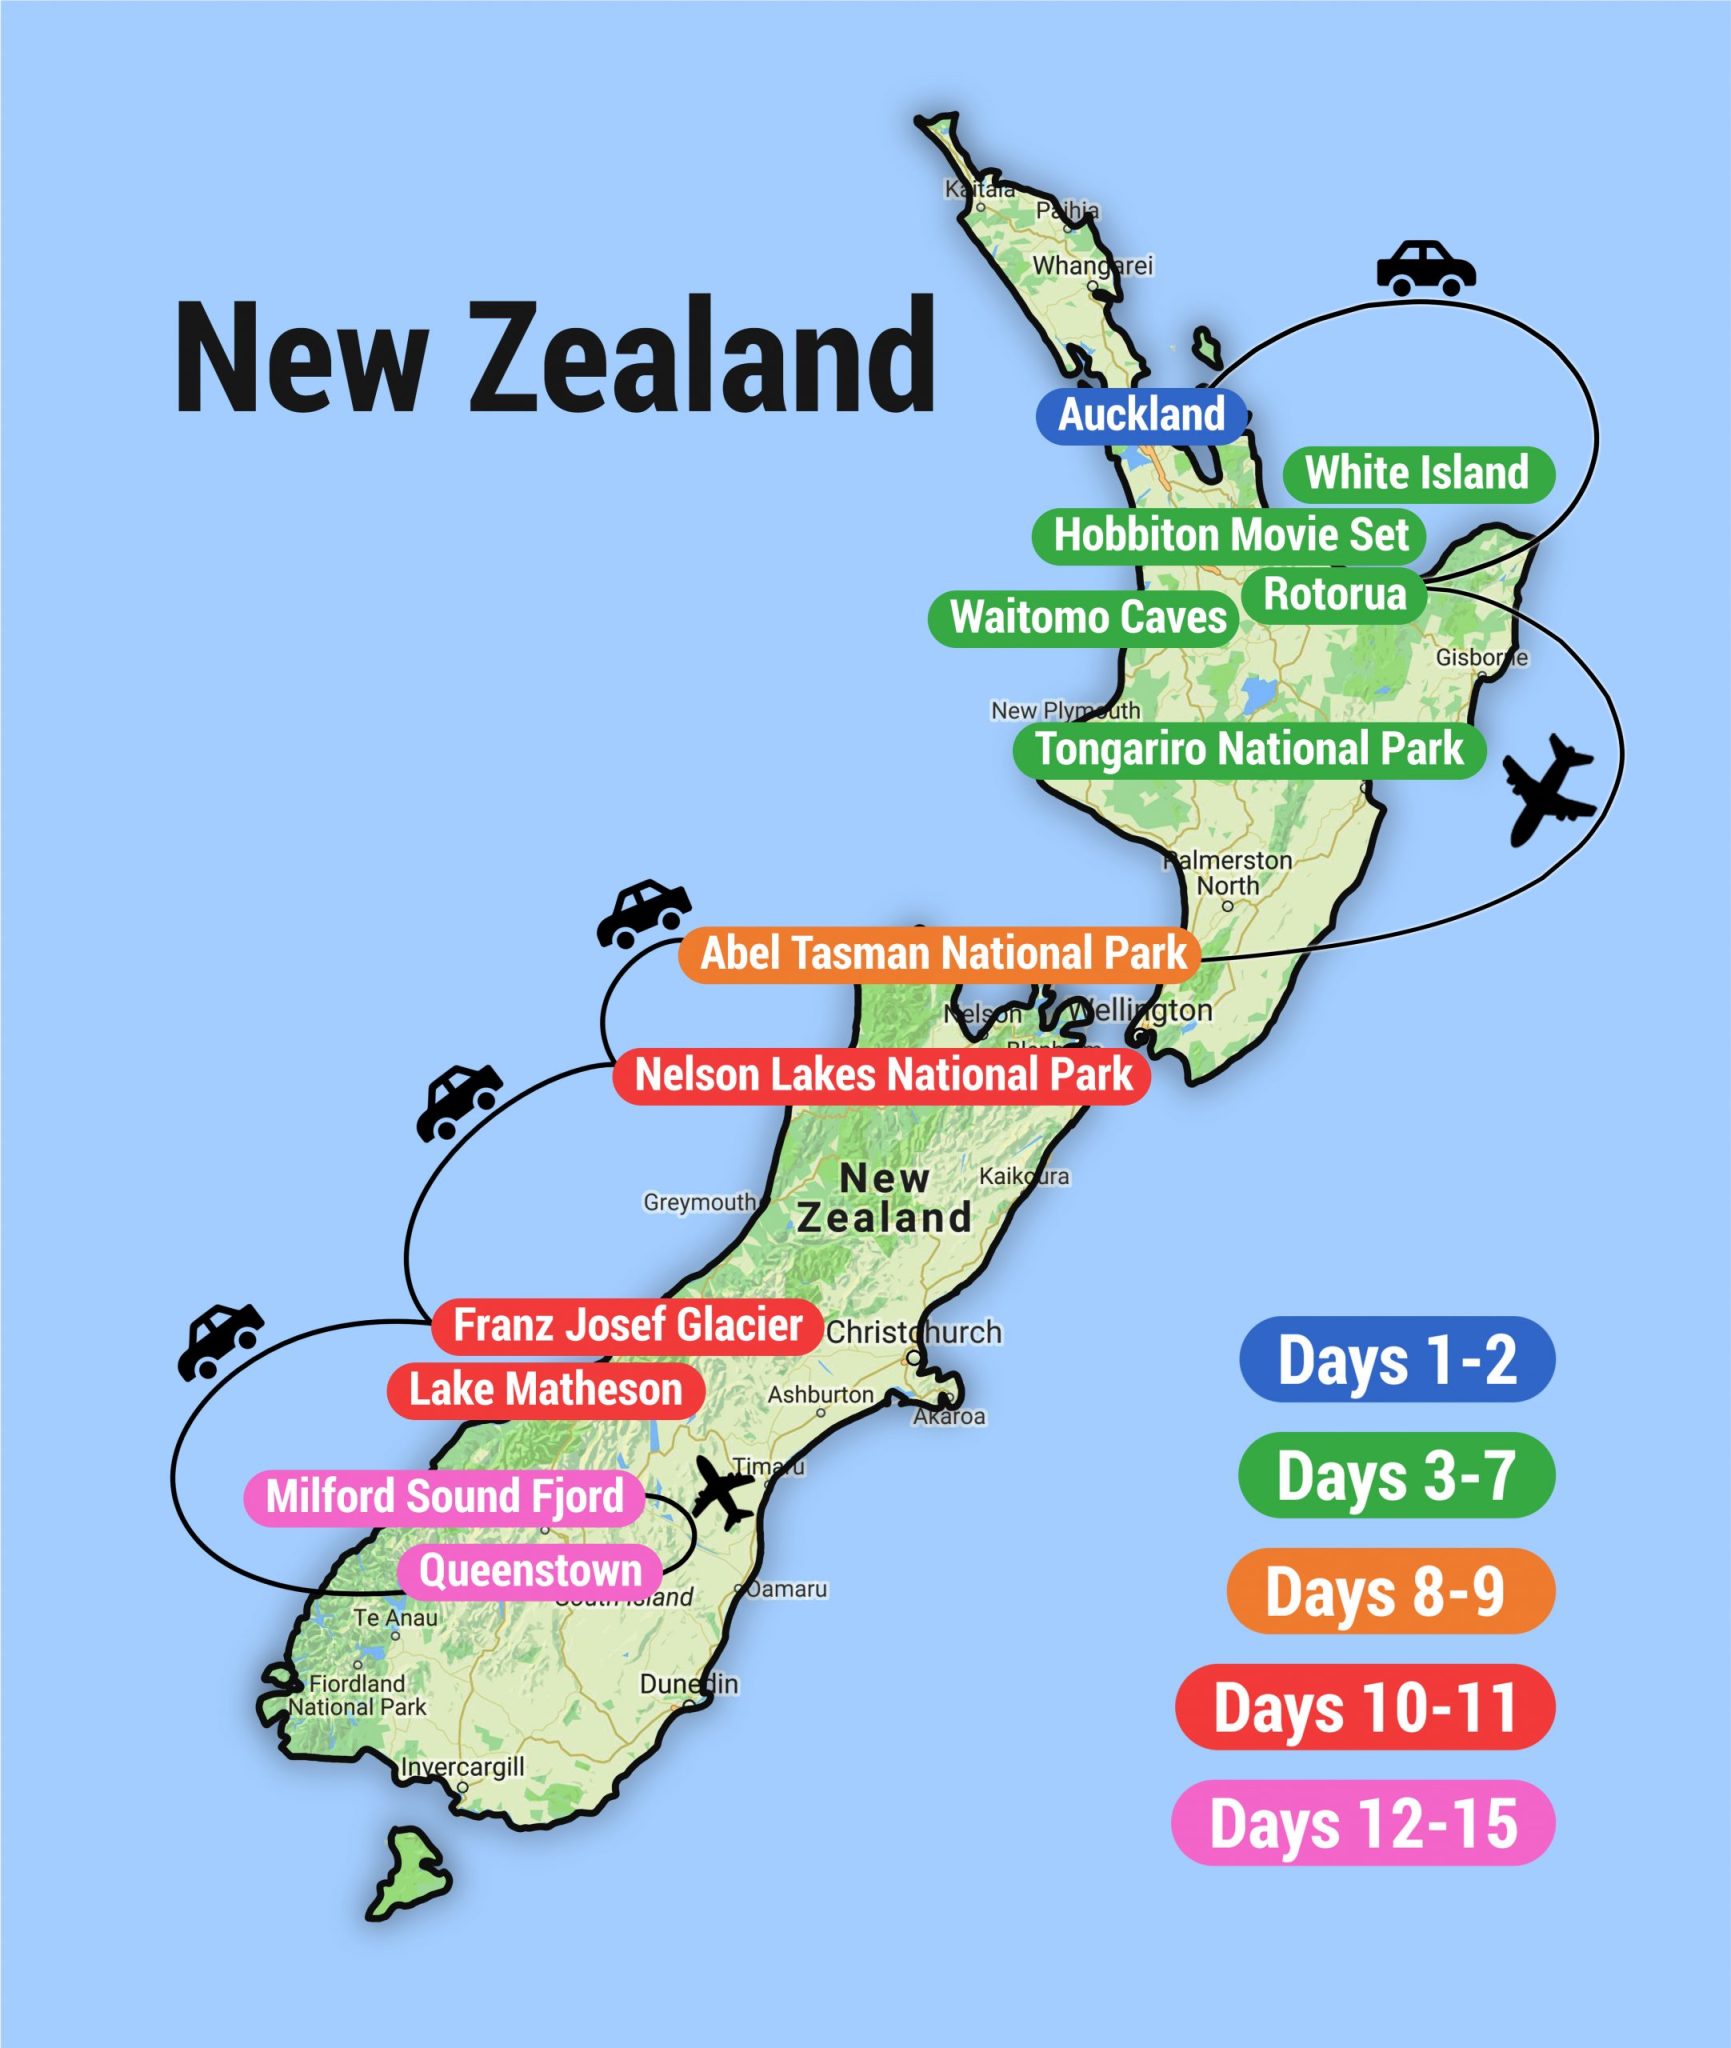 New Zealand: See & Experience it ALL in 10 Days, 1st Class Traveling